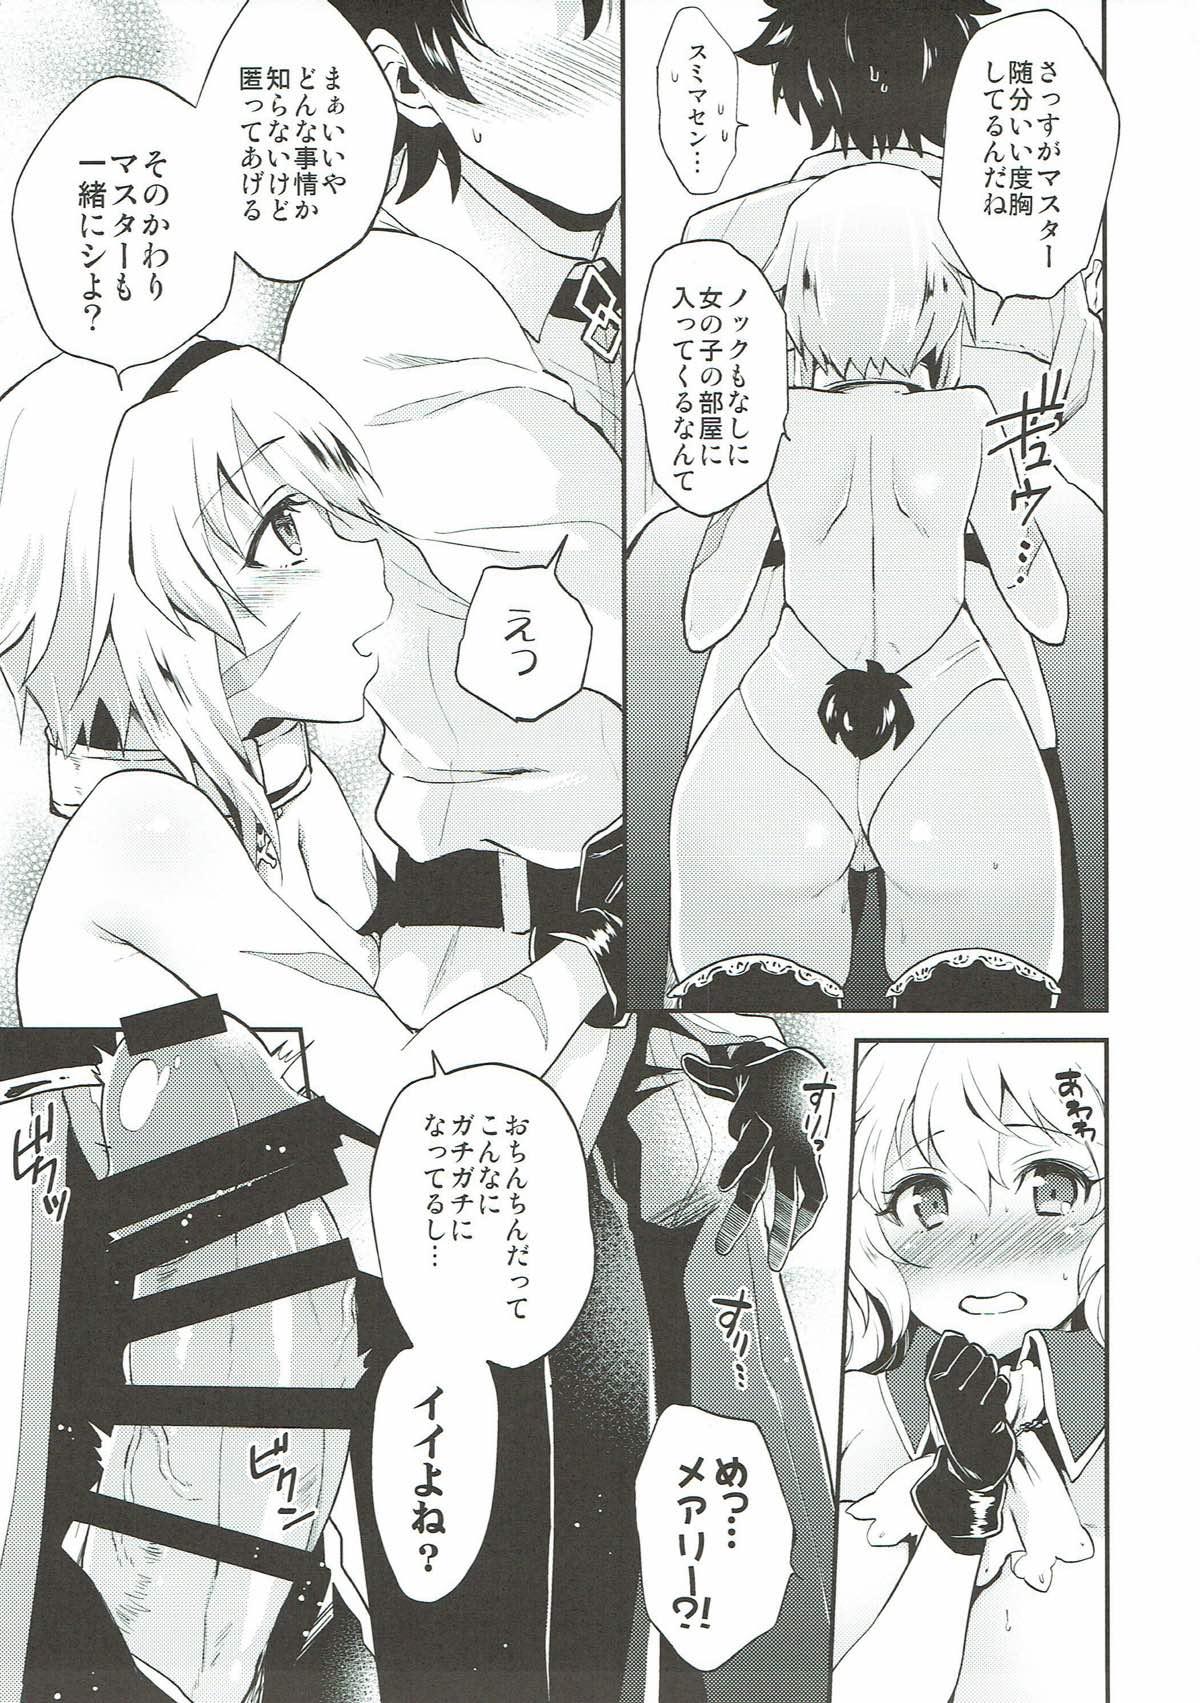 Gostoso Lovebird Love - Fate grand order Amateur Pussy - Page 5